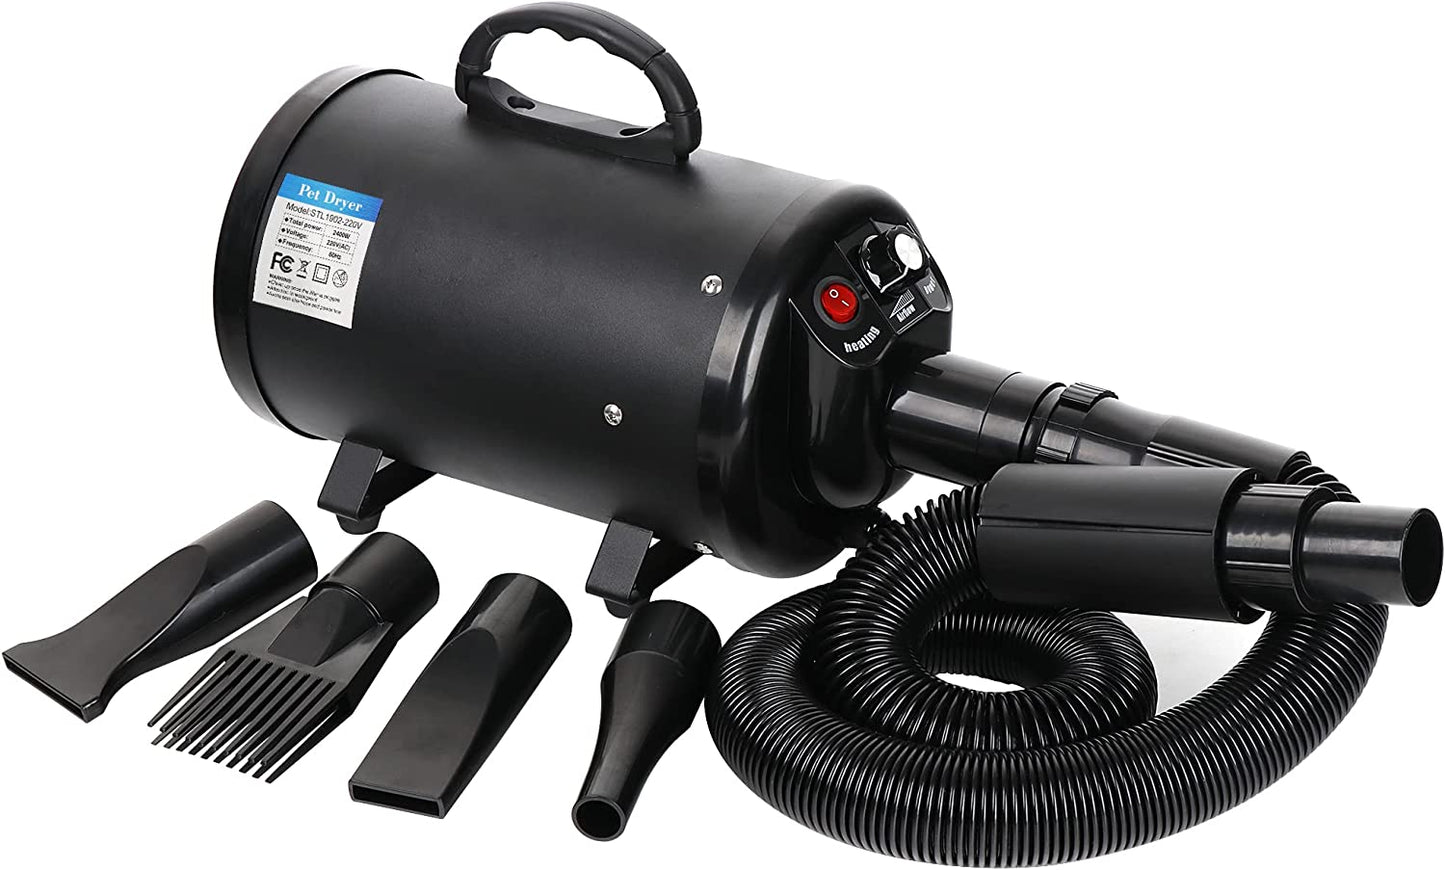 Dog Dryer, Pet Grooming Blower with Heater for Cat/Dog, 2400W Speed-Adjustable Pet Hair Dryer, with 4 Different Nozzles + 2 Filter, Black